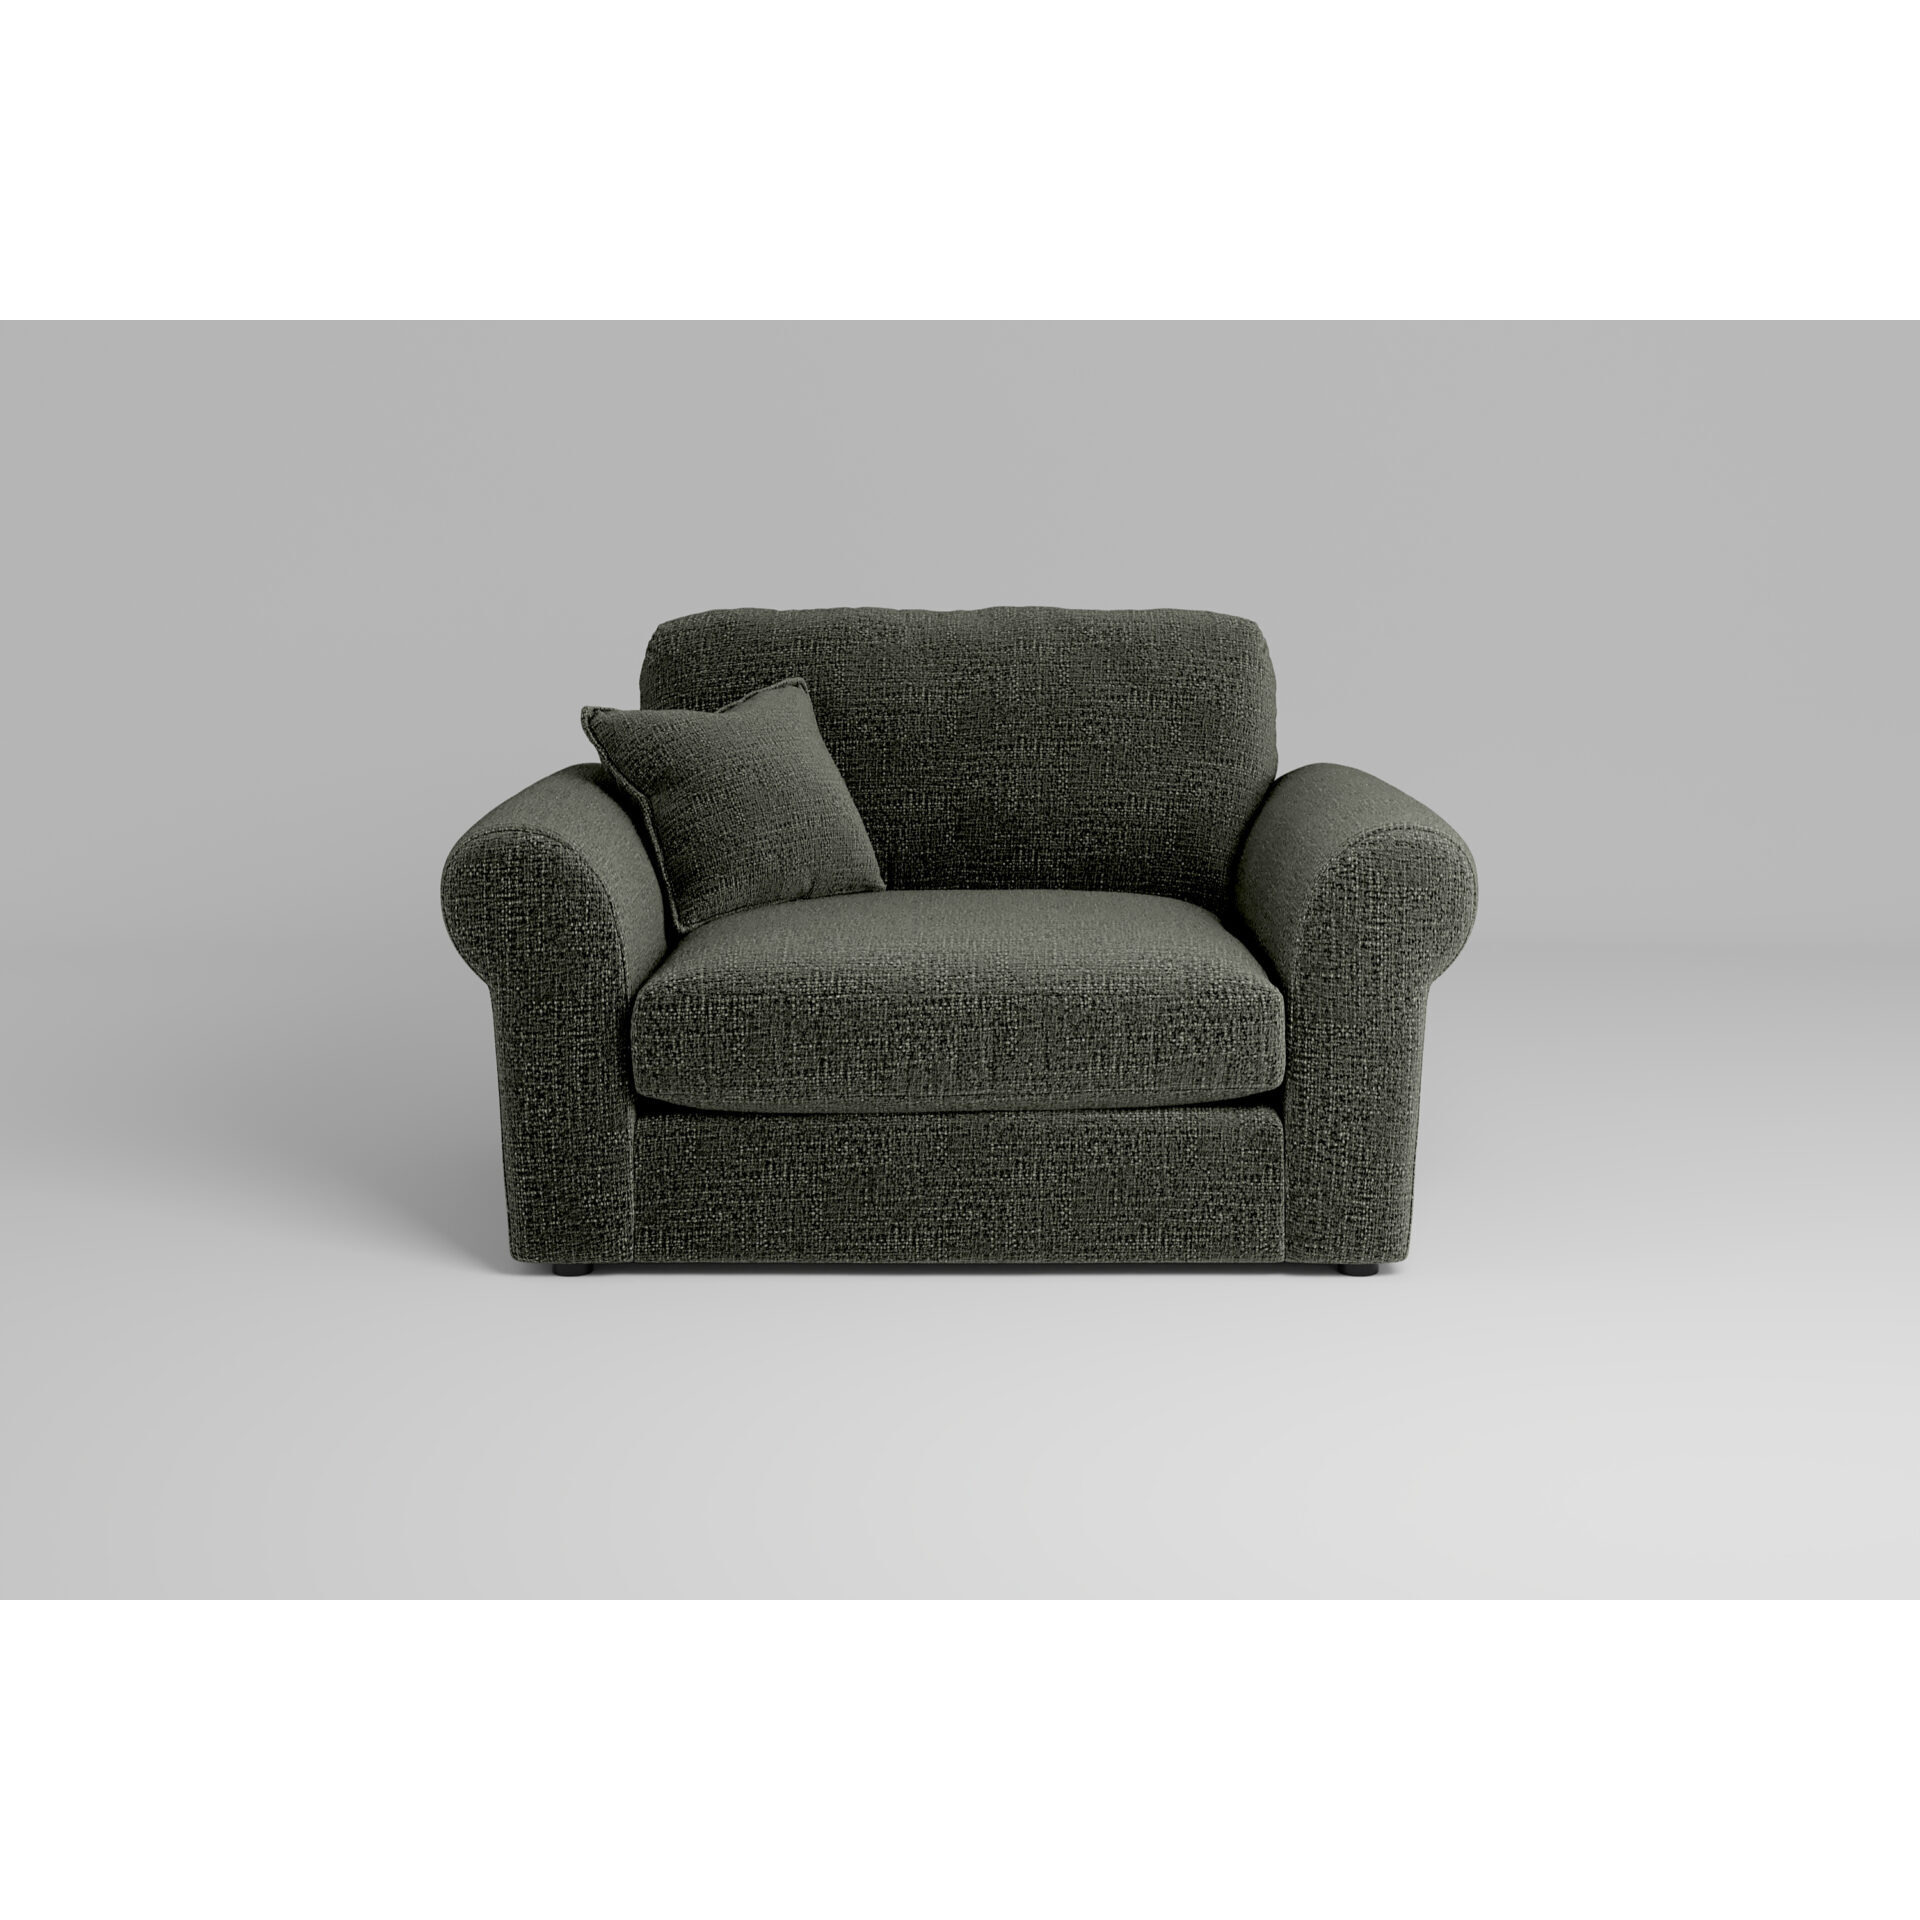 Mellow Loveseat Charcoal Grey - Chunky Textured Weave